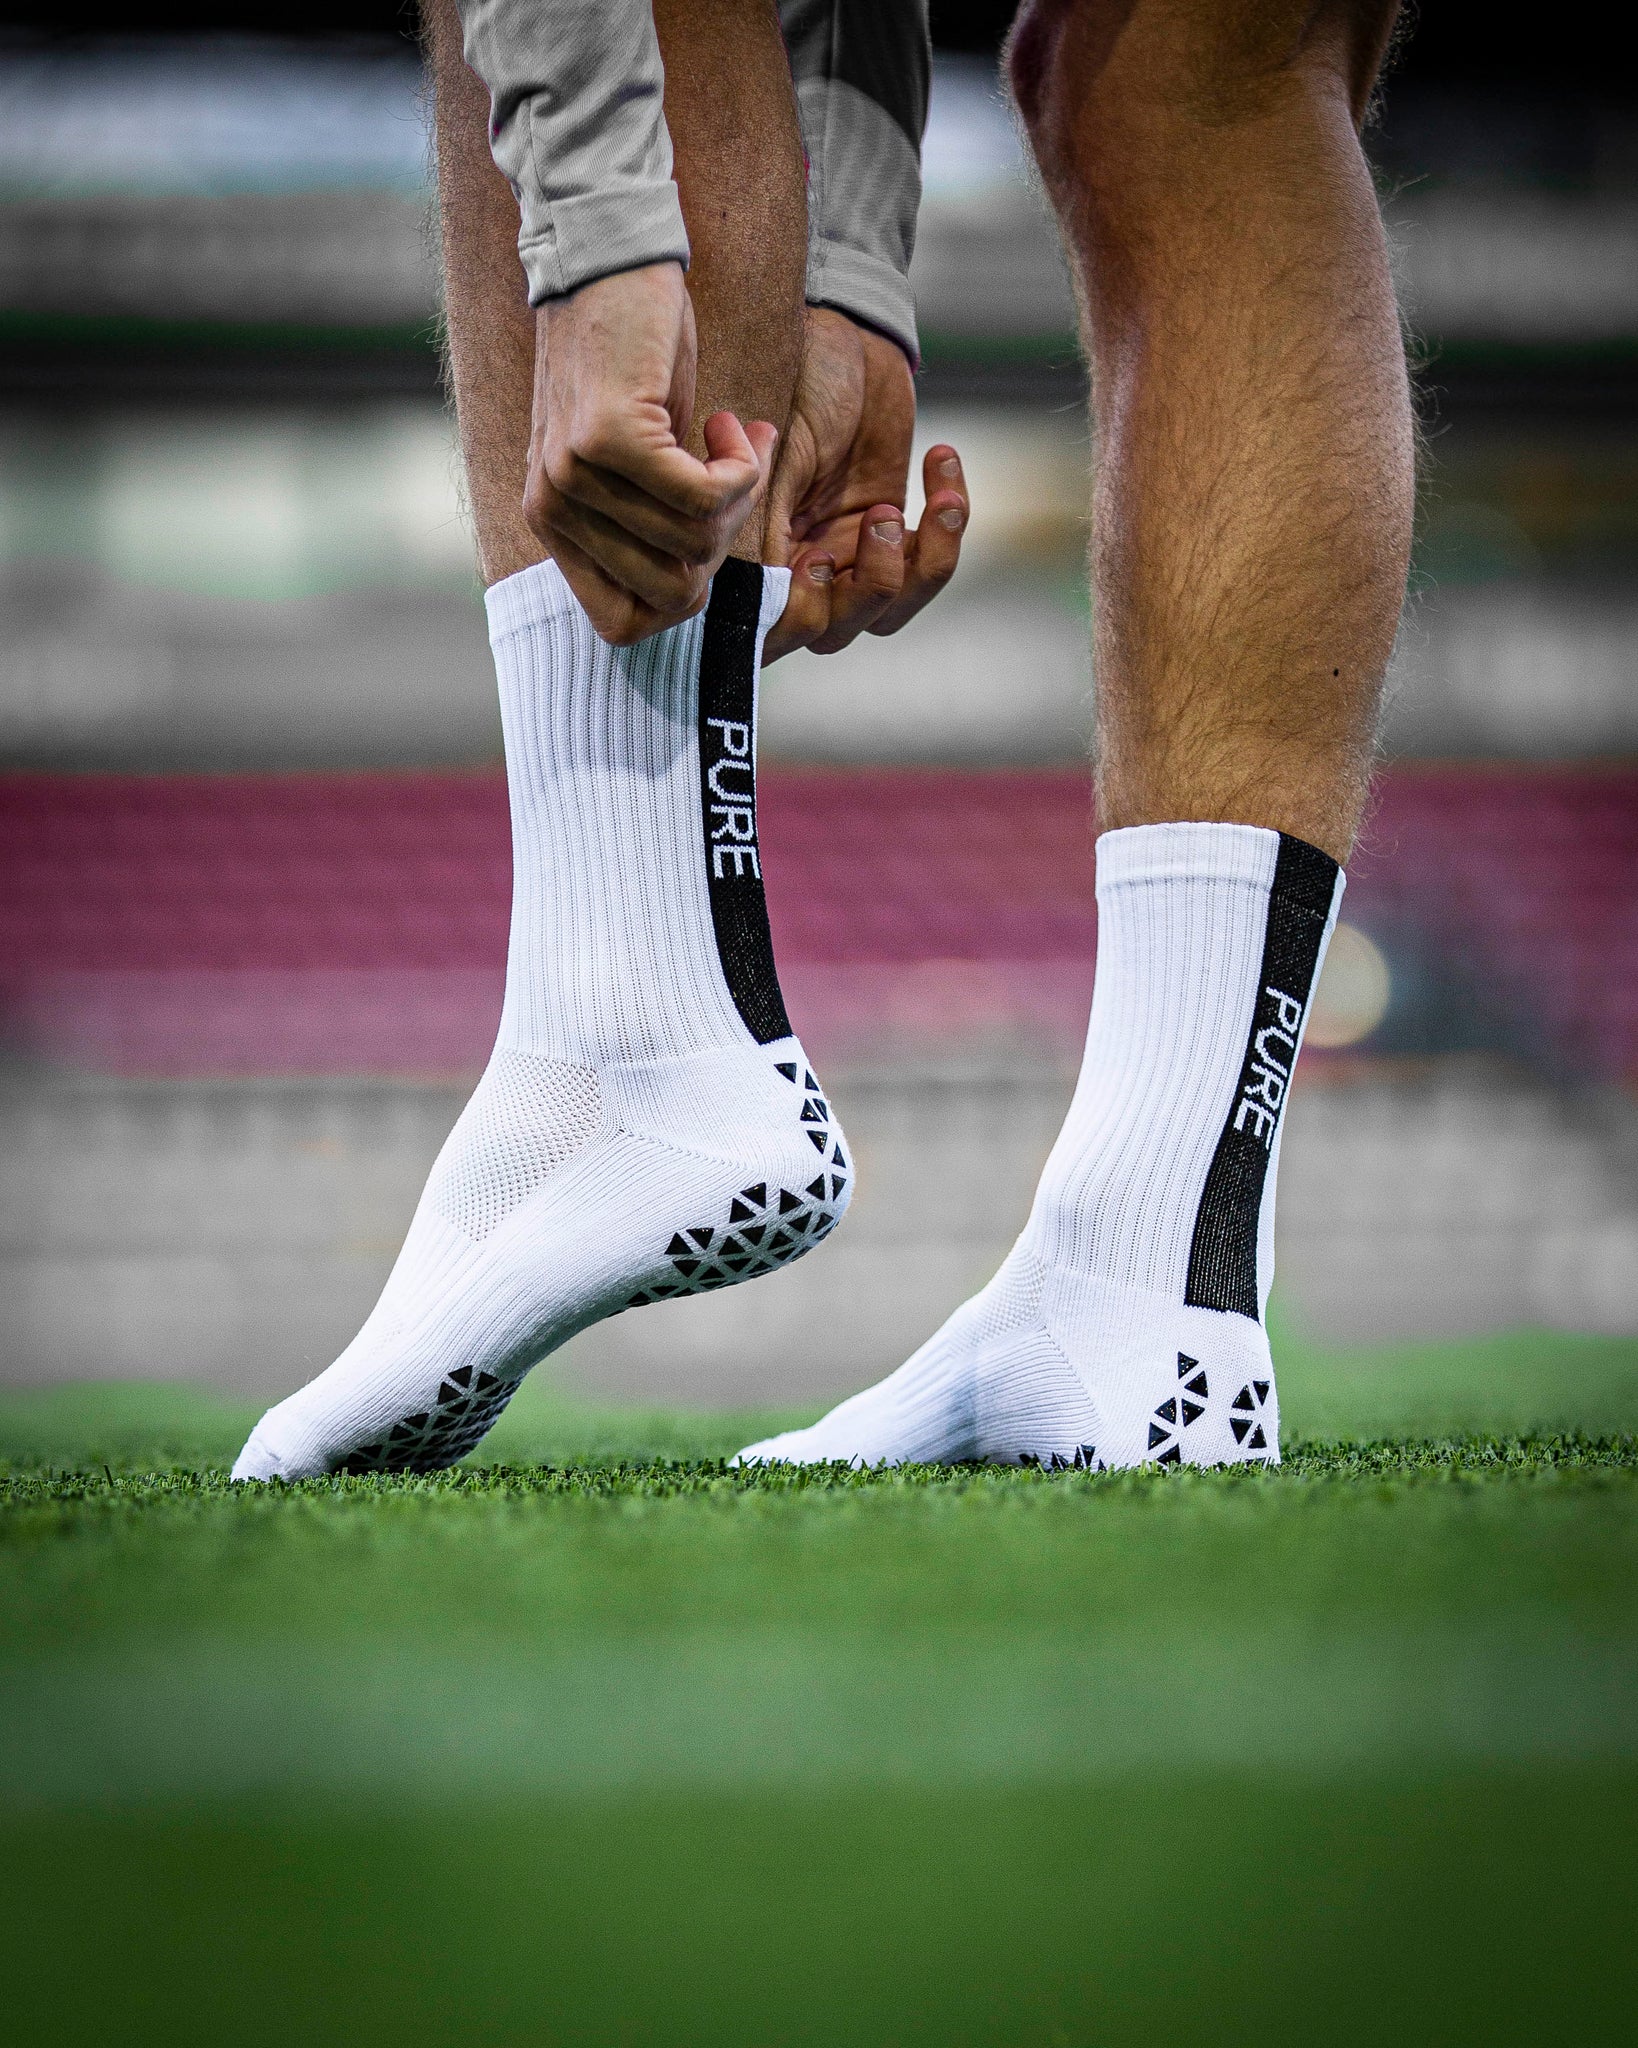 Soccer World Victoria, BC Canada Pure Grip Socks available here